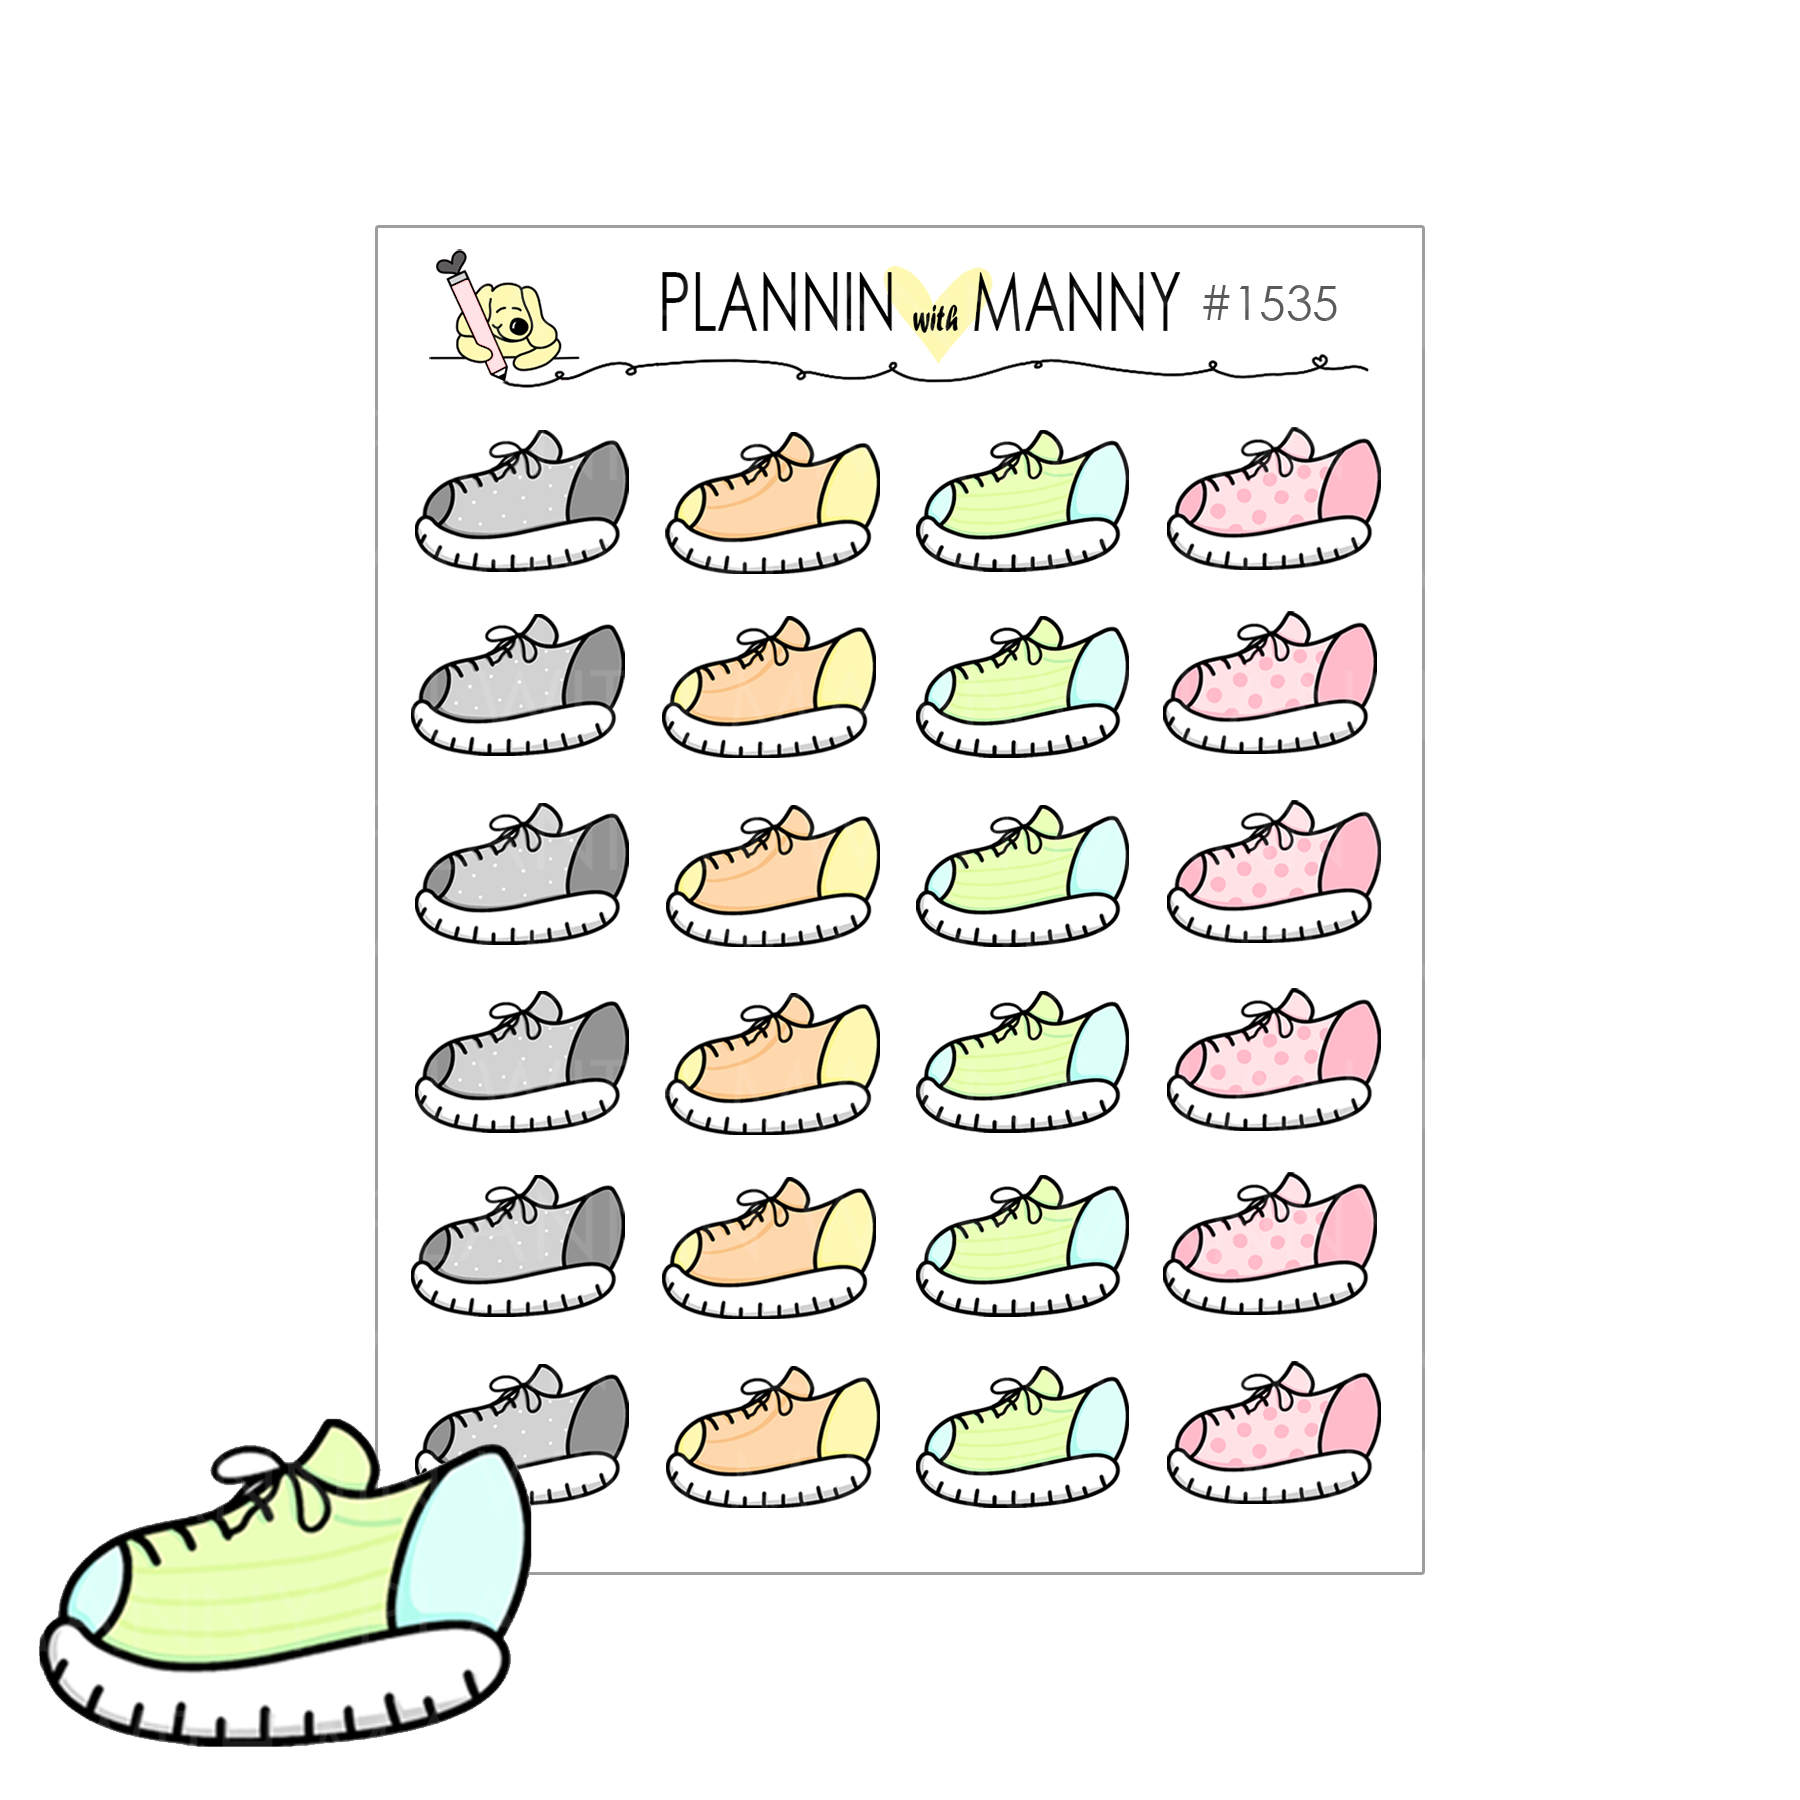 1535 Shoe Planner Stickers-Perfect to Mark Your Run or Walk Times!